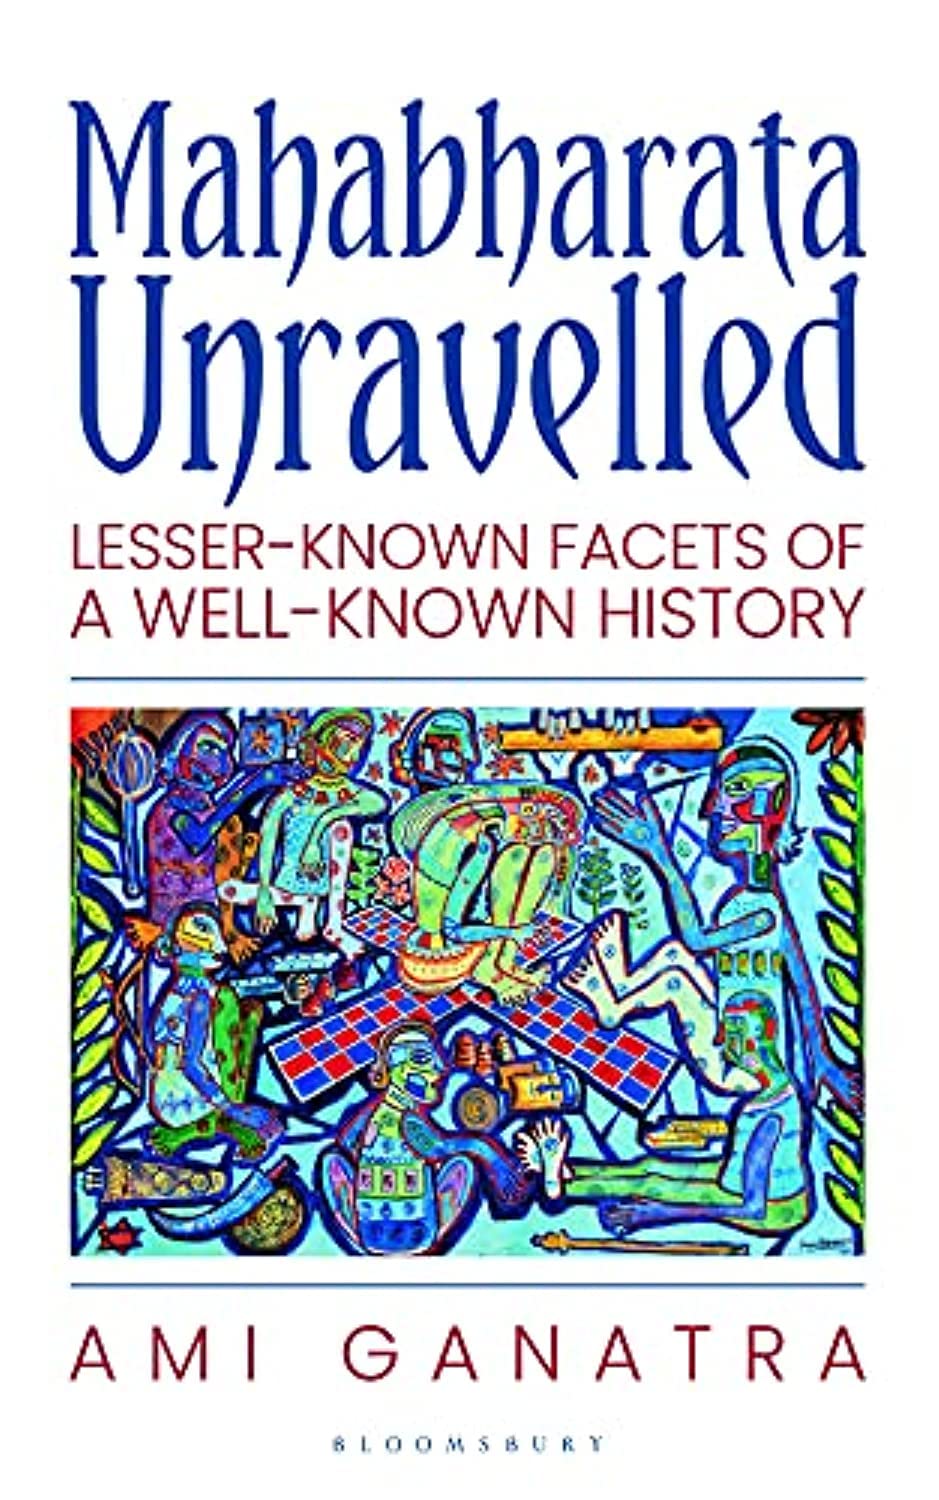 Mahabharata Unravelled: Lesser-Known Facets of a Well-Known History by Ami Ganatra